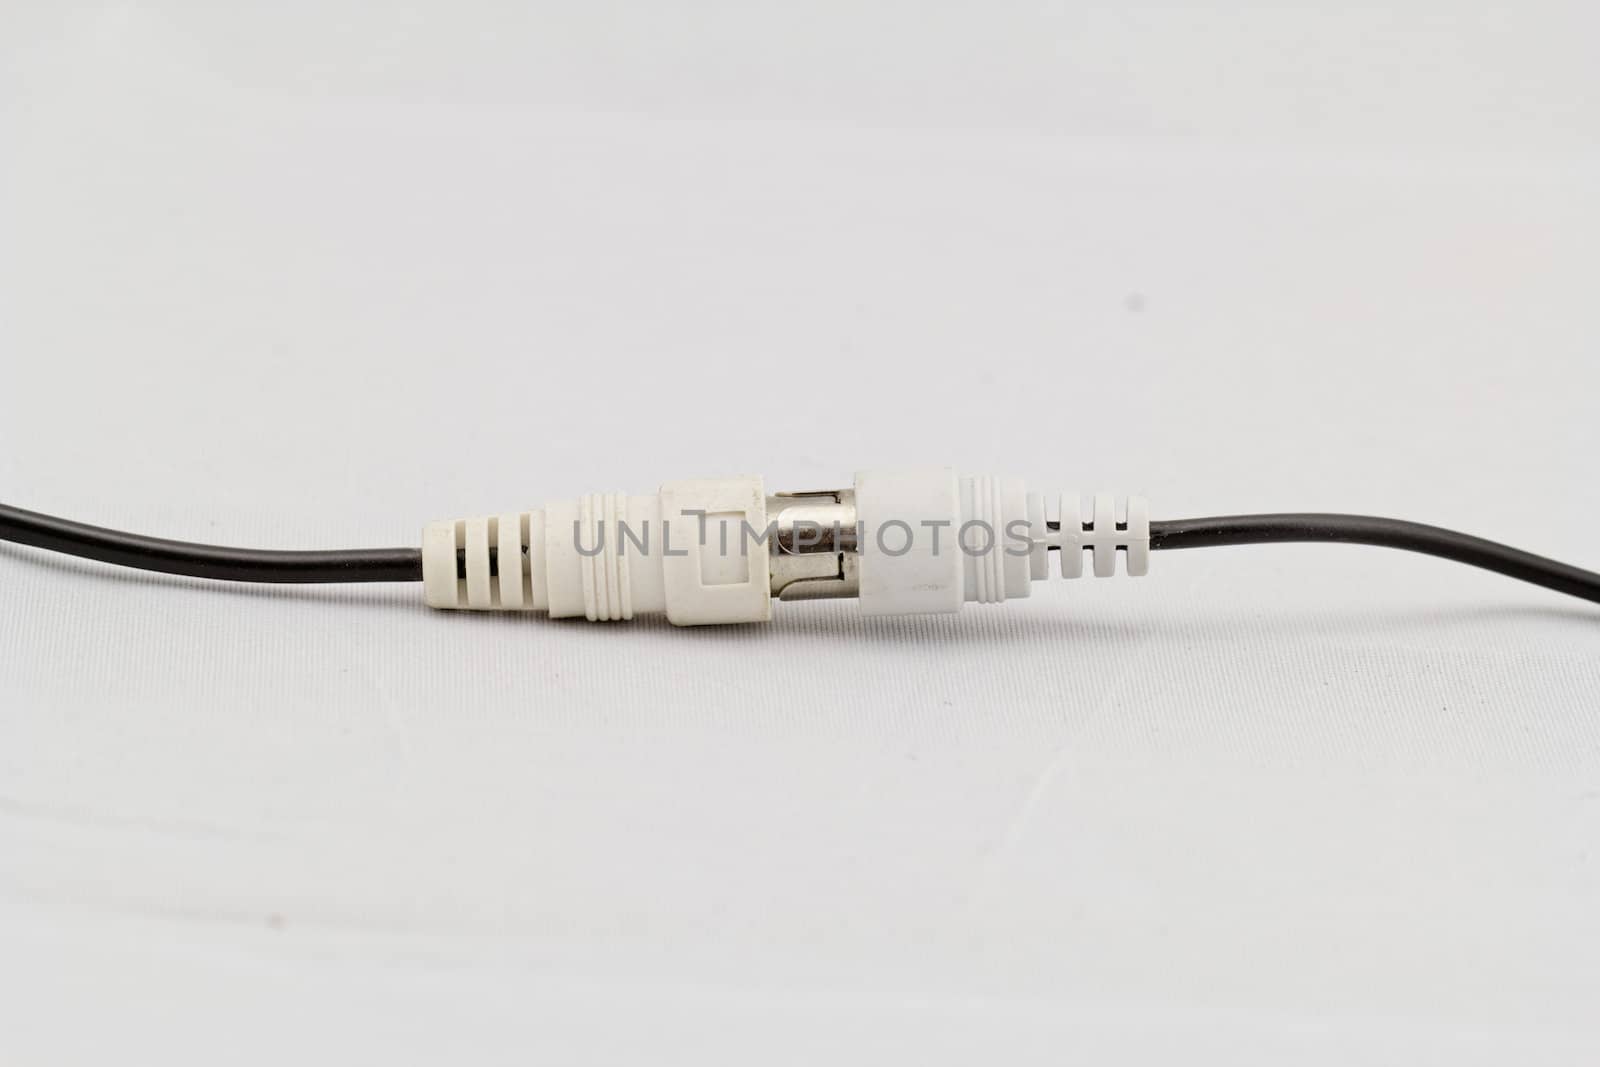 audio RCA cable on a white background by NagyDodo